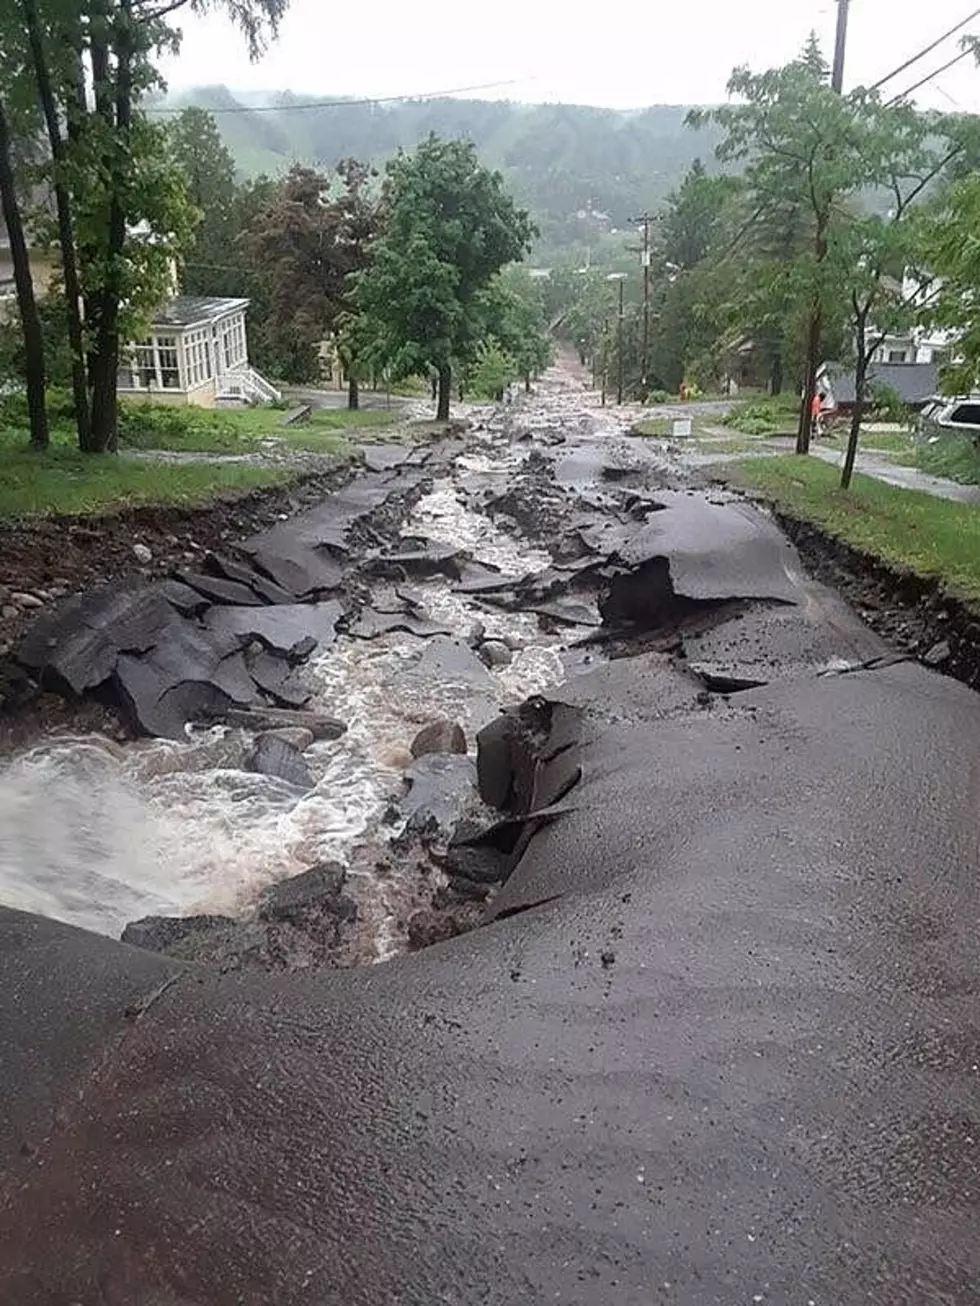 Houghton In The Upper Peninsula Ripped By Fierce Storms [Photos and Video]